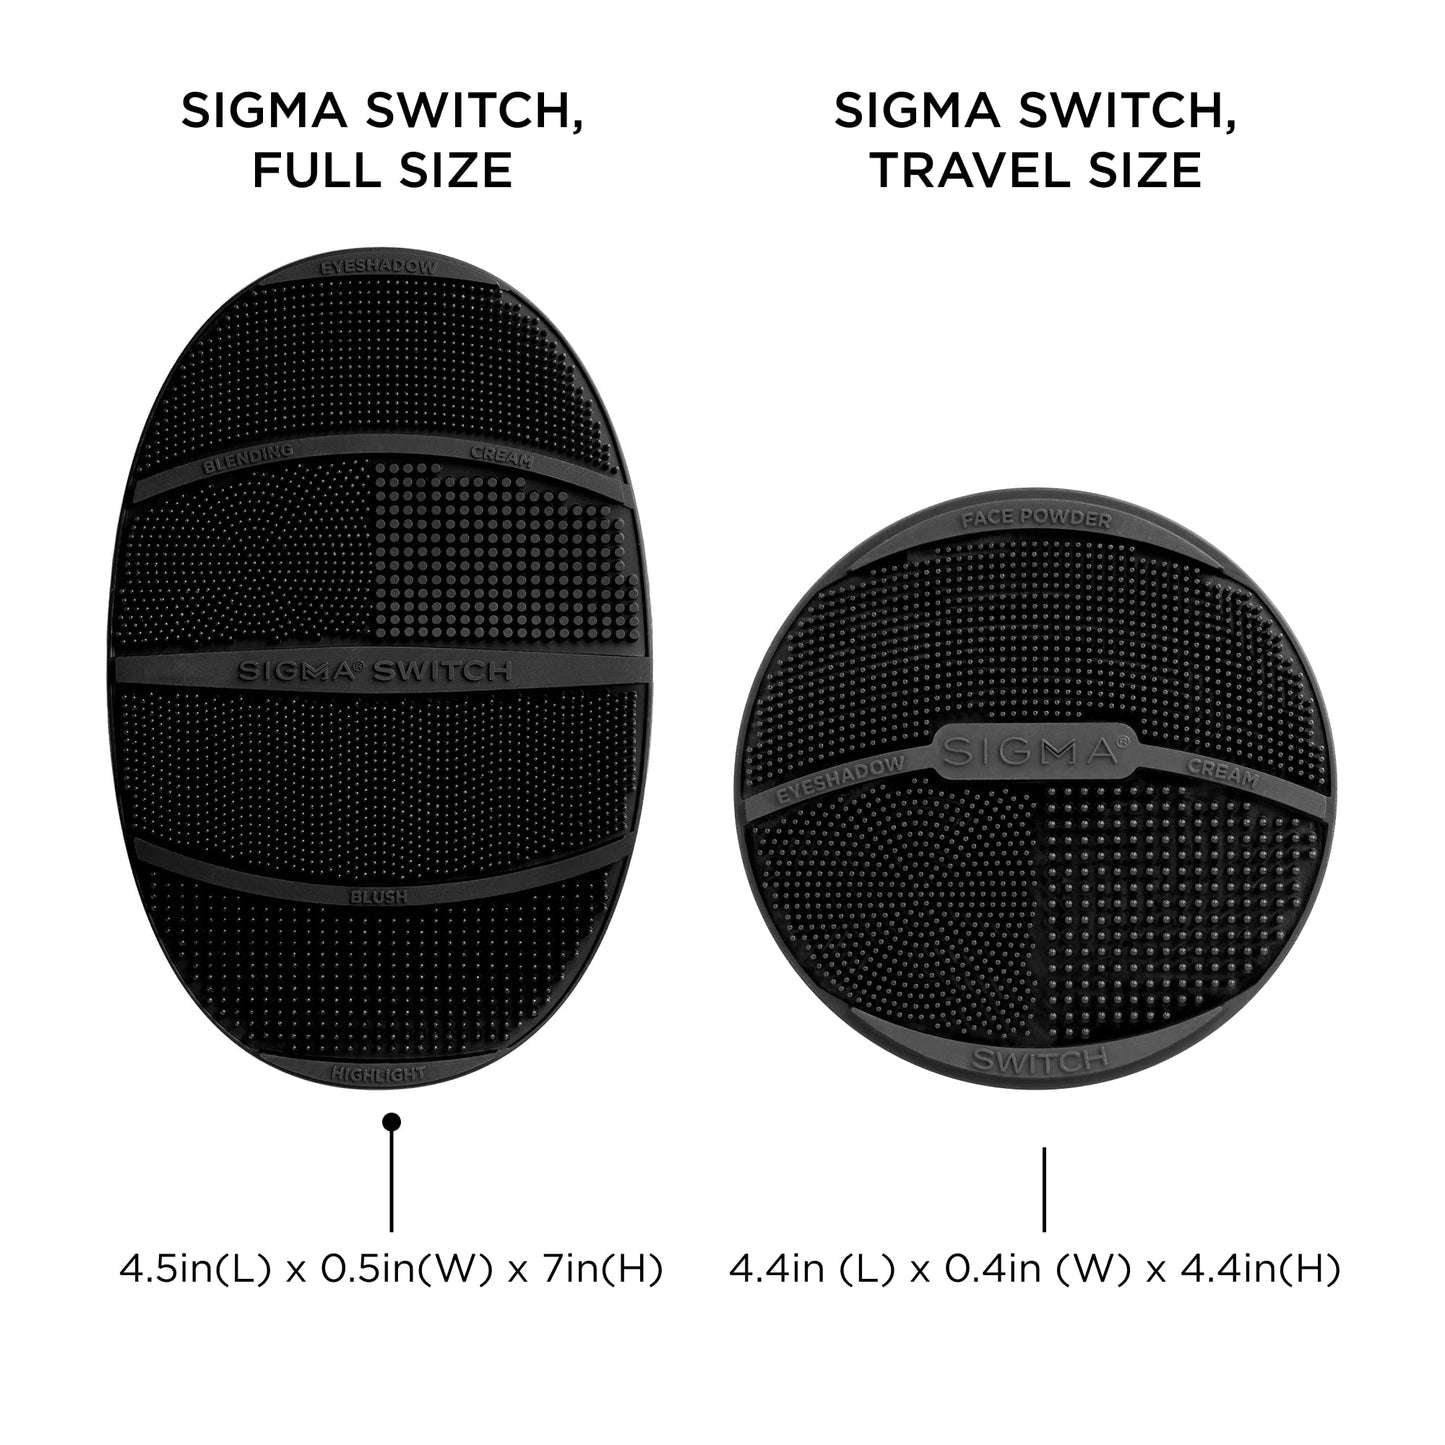 Sigma Switch by Sigma Beauty – Silicone Makeup Brush Cleaner for Switching Shades and Pigments, Switch Cleaning Mat for Superior Makeup Brush Cleaning Mid-Application (Travel Size)